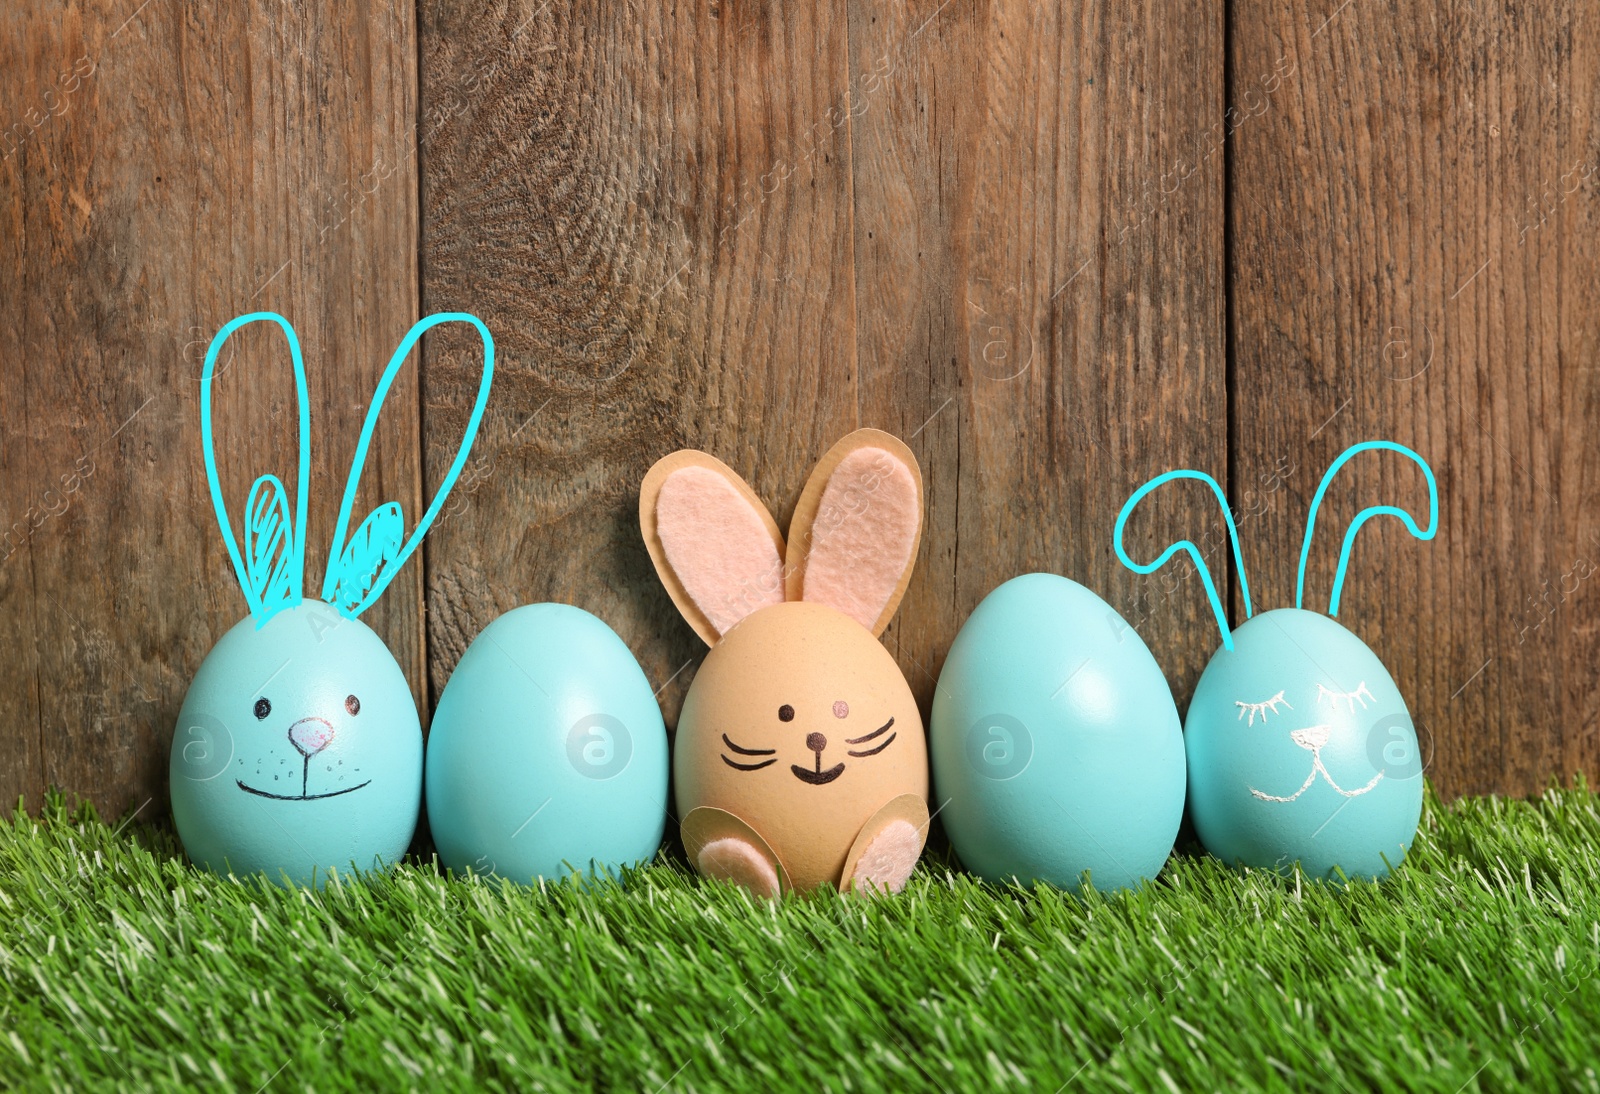 Image of Several eggs with ears as Easter bunnies among others on green grass against wooden background